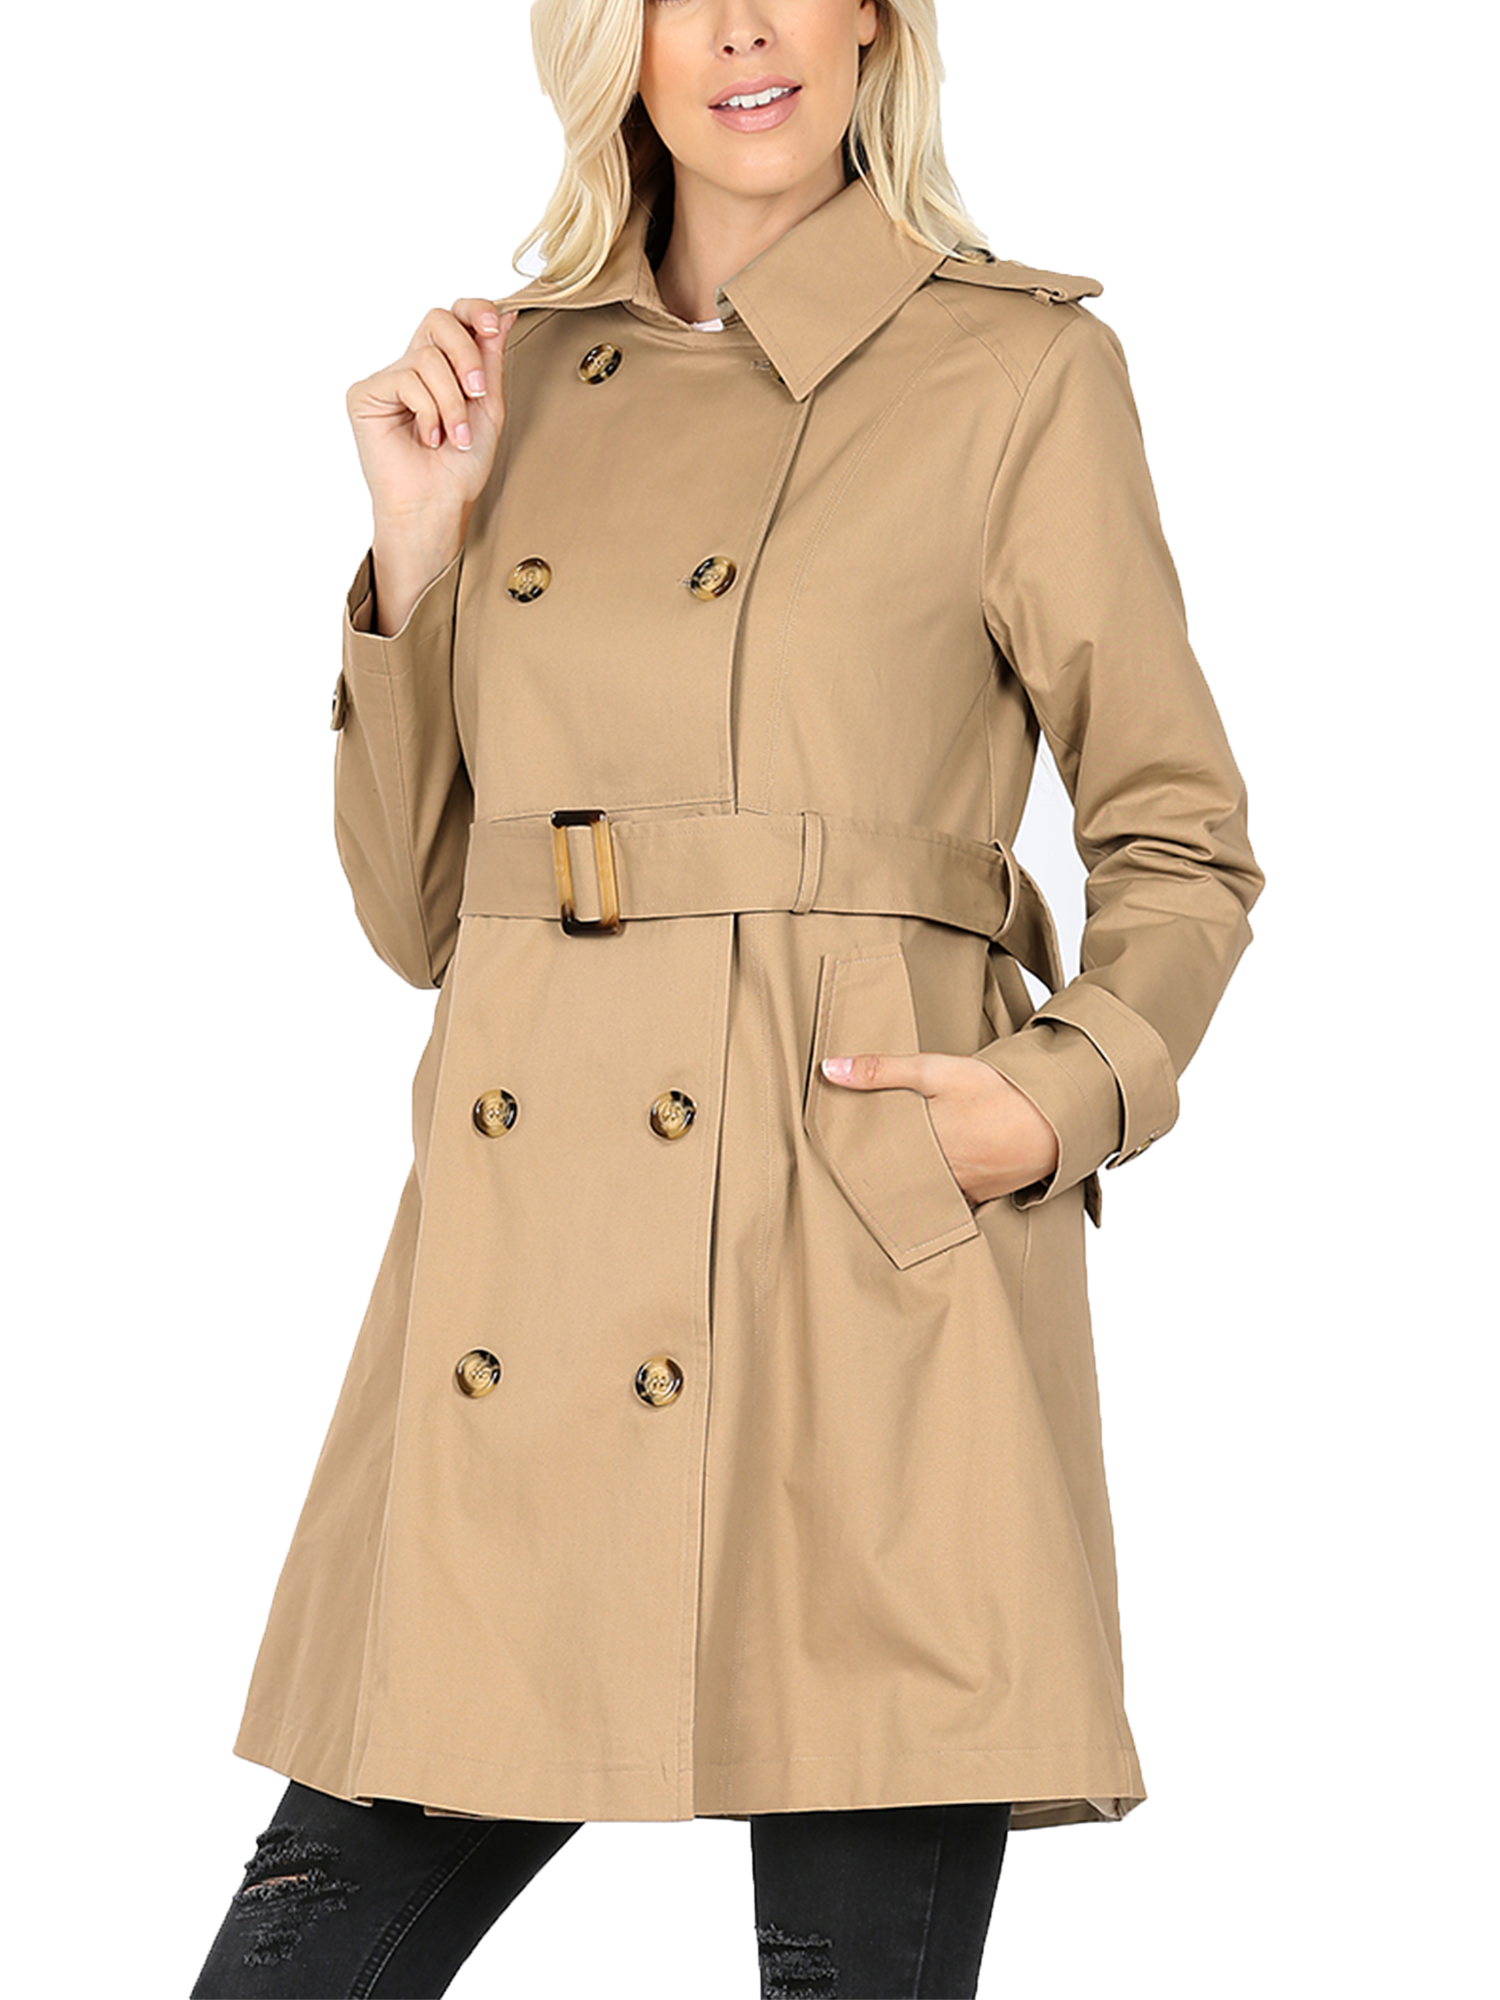 KOGMO Womens Double Breasted Trench Coat Jacket with Waist Belt - image 1 of 5